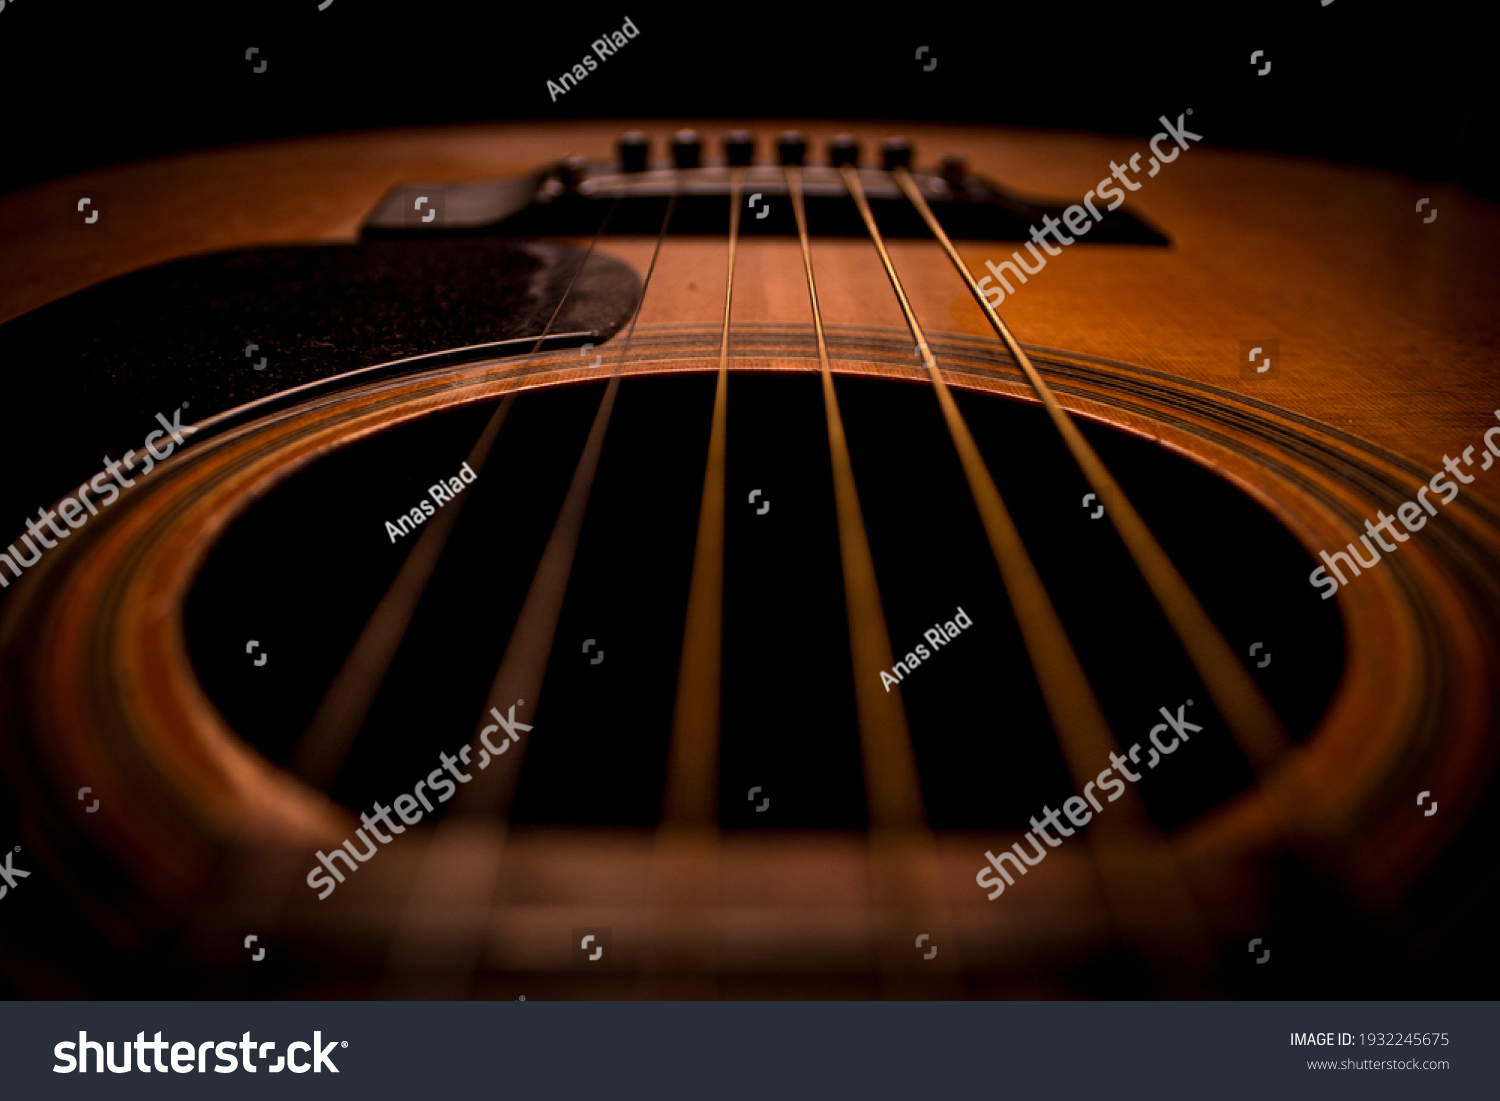 Guitar.Guitar's chords.Acoustic guitar.Music.Music background.Image of an acoustic guitar in the dark.Playing music with some friends in the dark.Classical music.Closeup image of an acoustic guitar. #1932245675